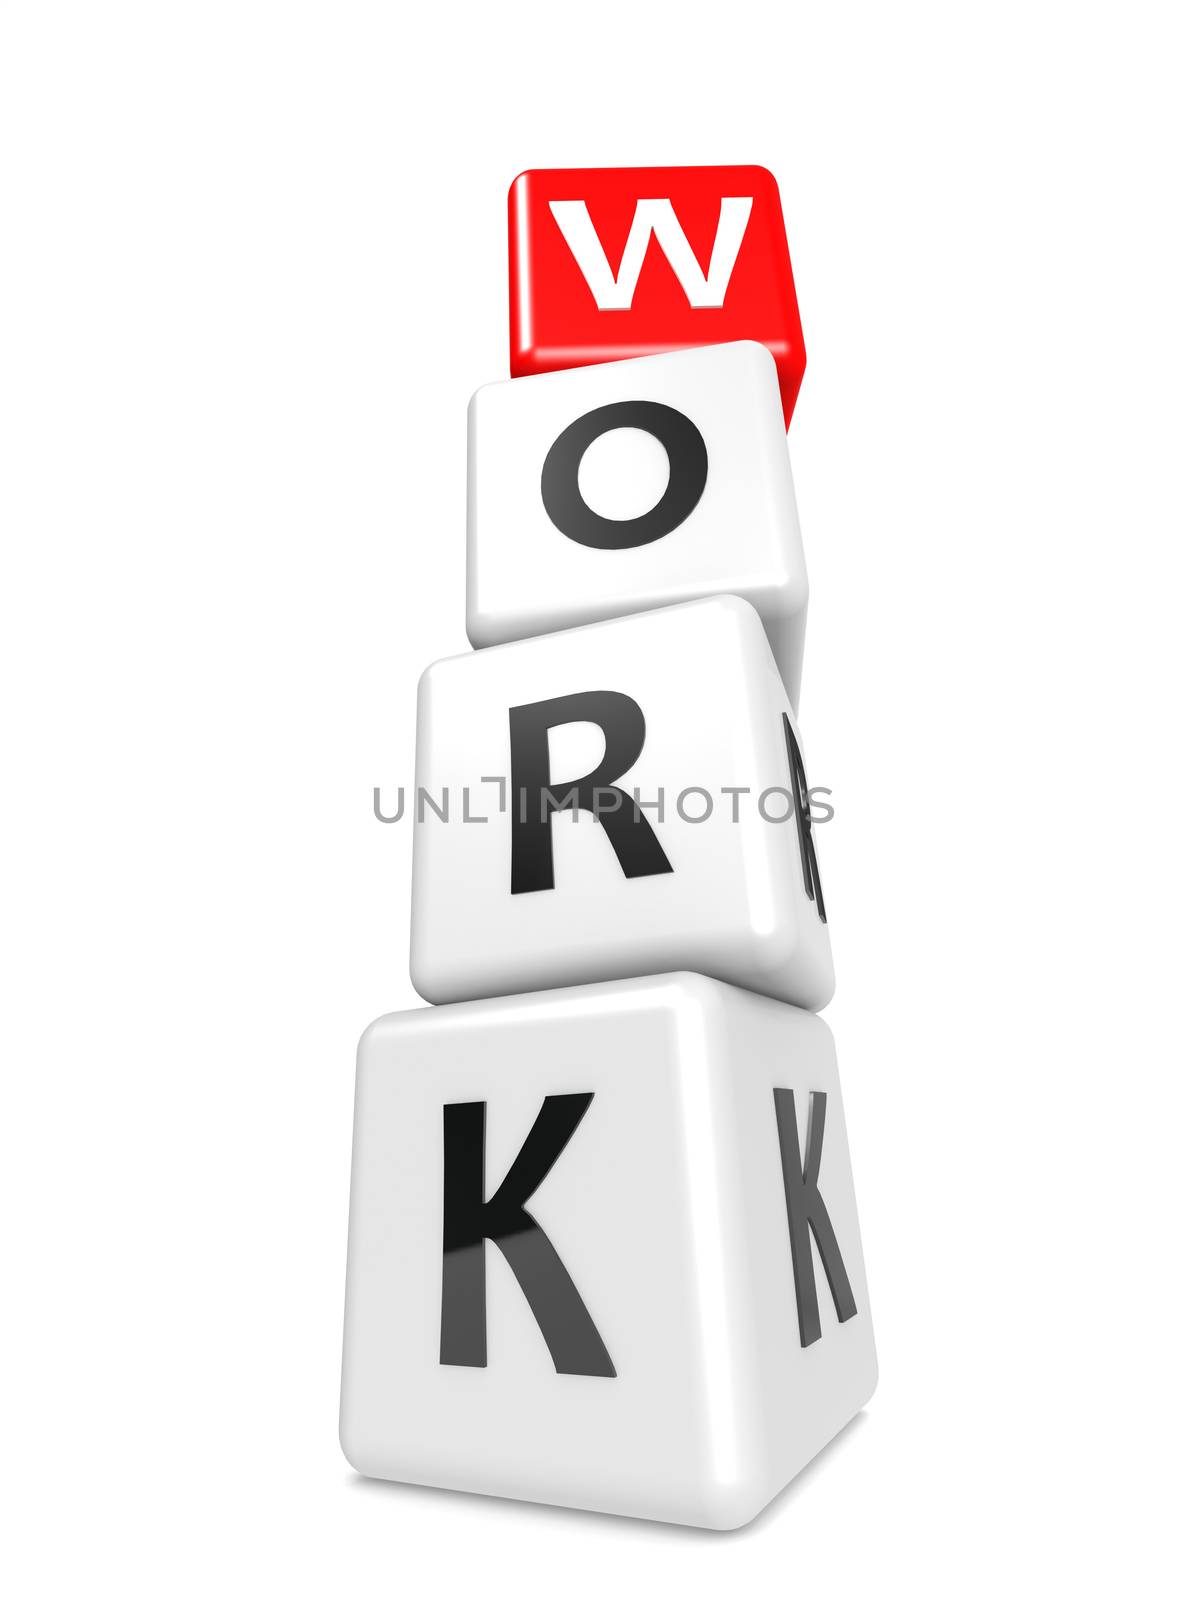 Buzzword work image with hi-res rendered artwork that could be used for any graphic design.